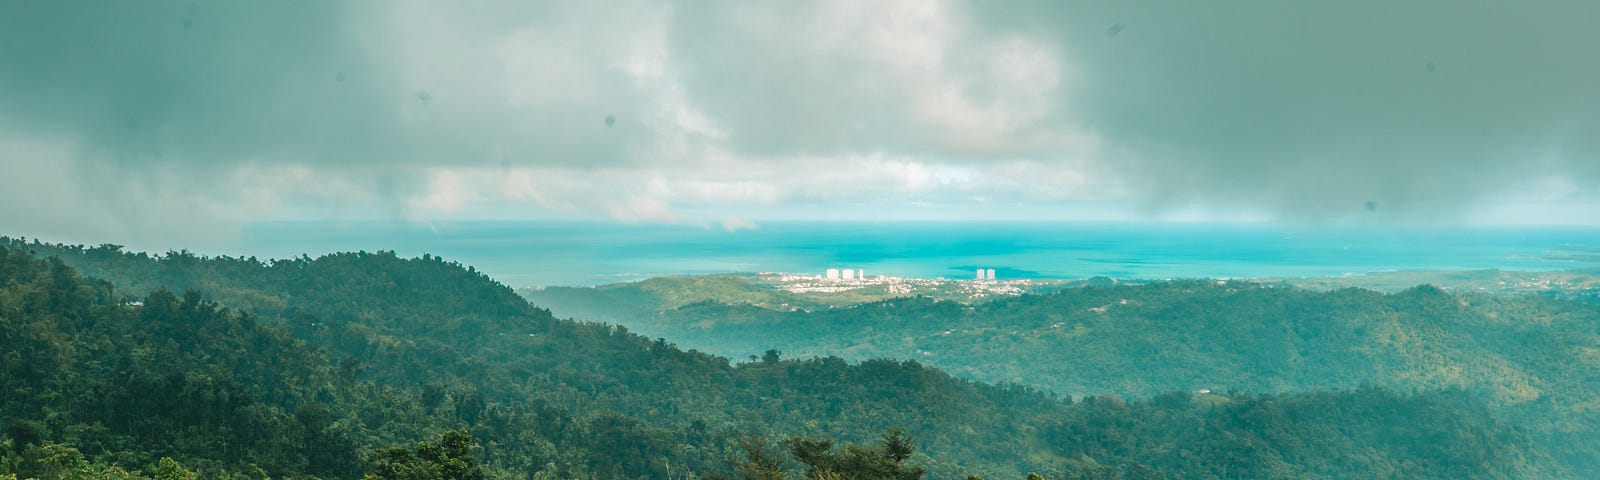 An wide shot of Puerto Rico’s protected forests as clouds billow overhead and the sea sprawls out in the distance.